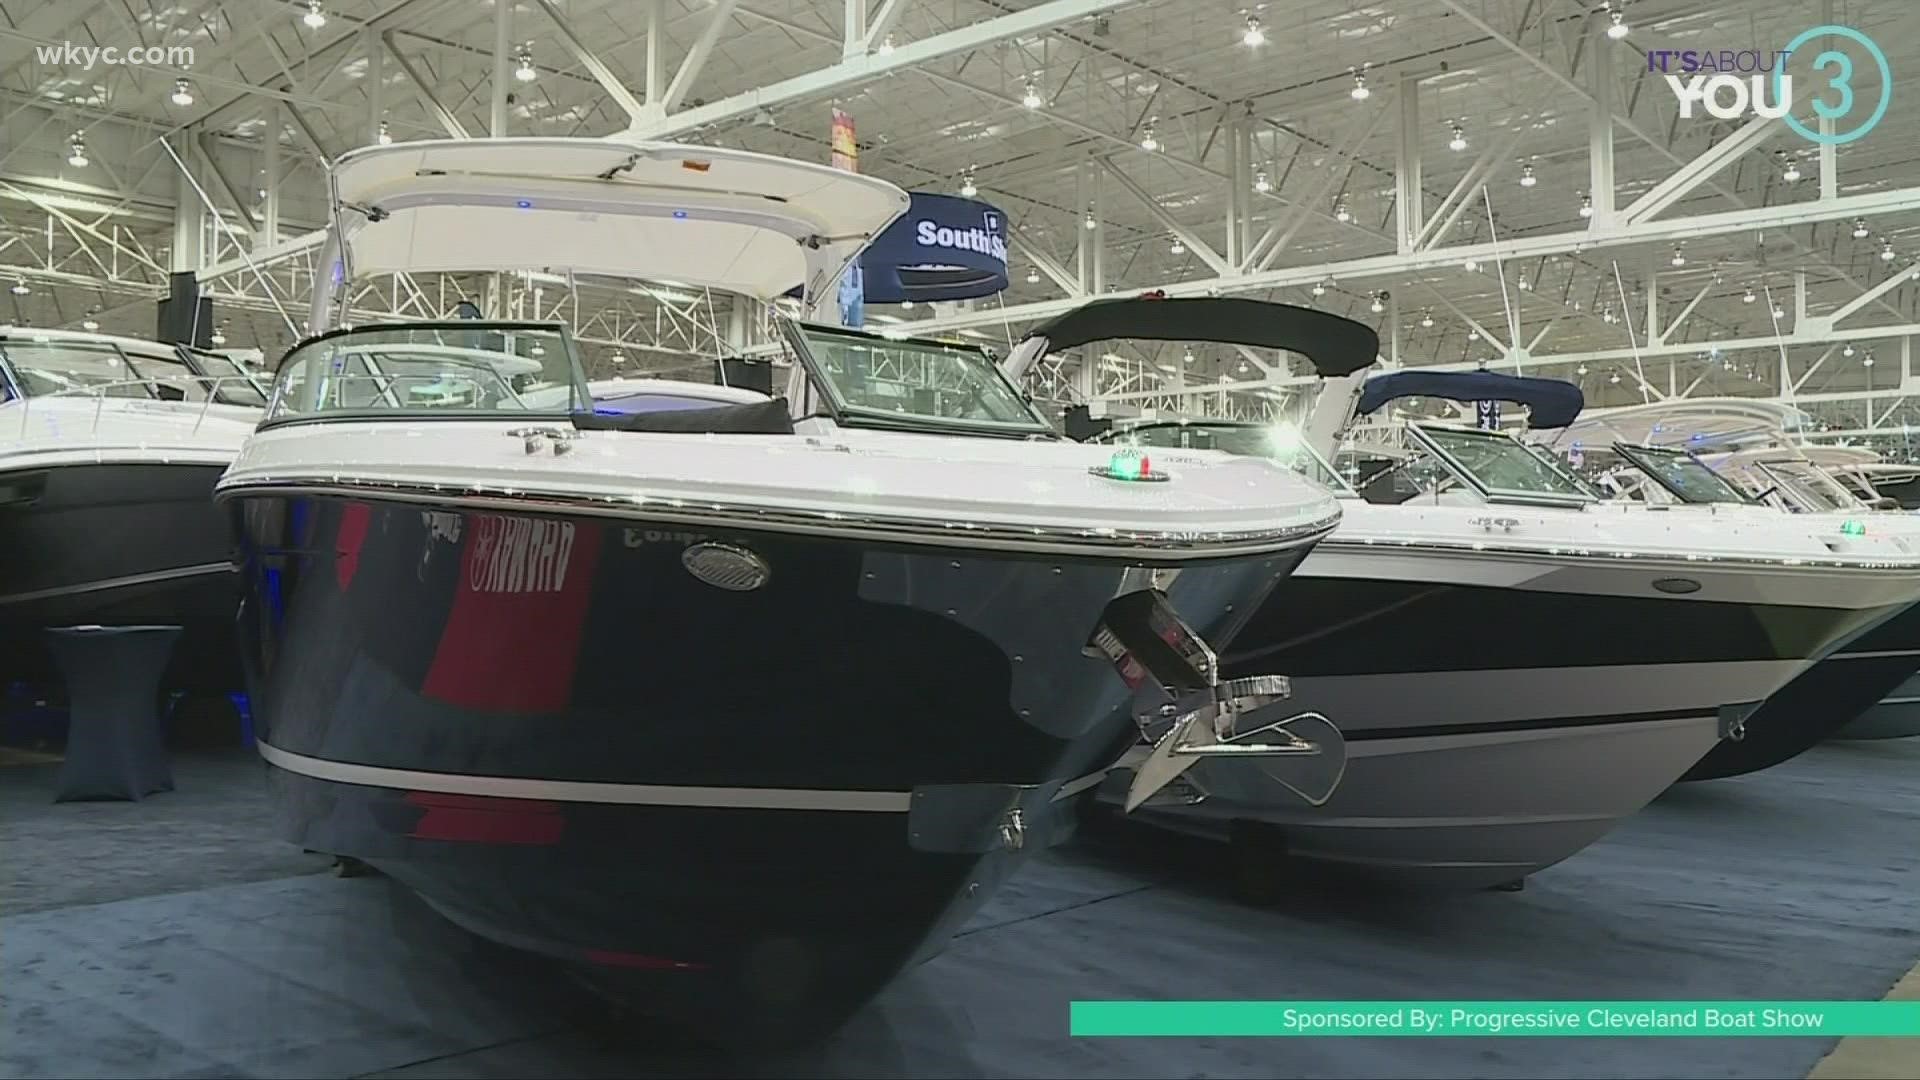 LeeAnn is speaking with Michelle Burke to learn more about this year's Cleveland Boat Show!